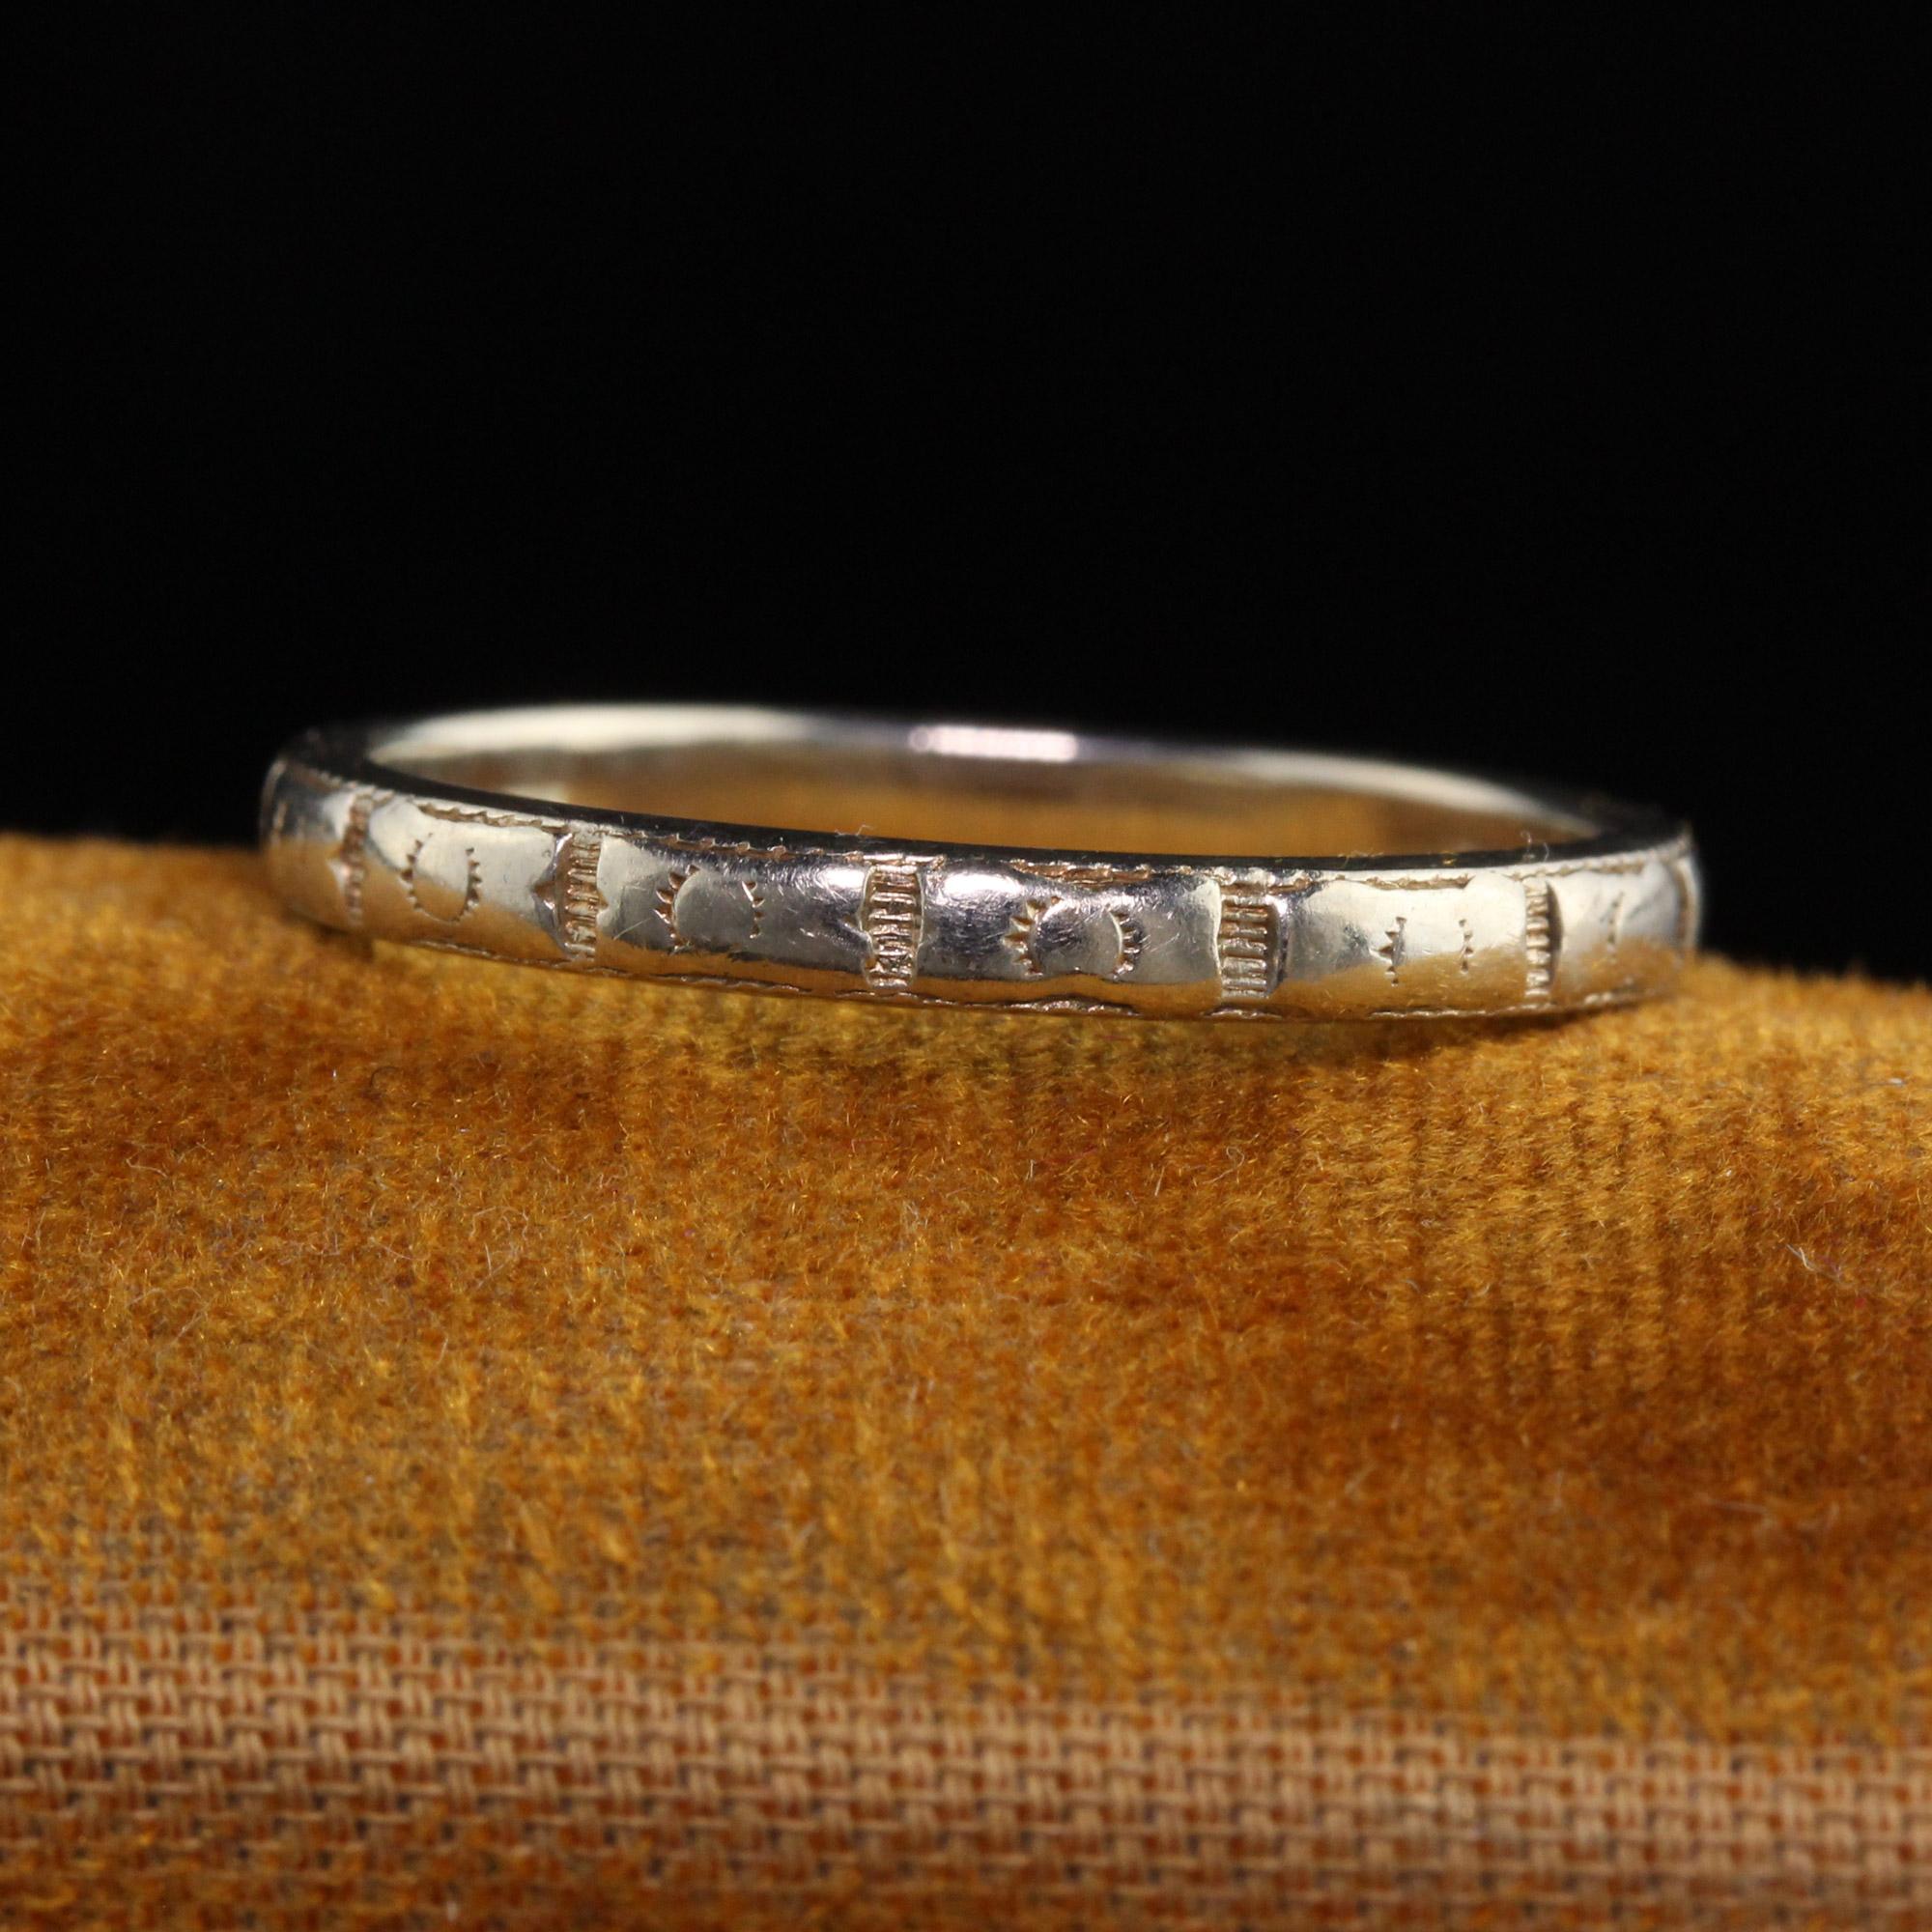 Beautiful Antique Art Deco 18K White Gold Engraved Wedding Band. This beautiful wedding band is engraved around the entire ring with a pattern and is in good condition.

Item #R1162

Metal: 18K White Gold

Weight: 3.3 Grams

Size: 8

Measurements: